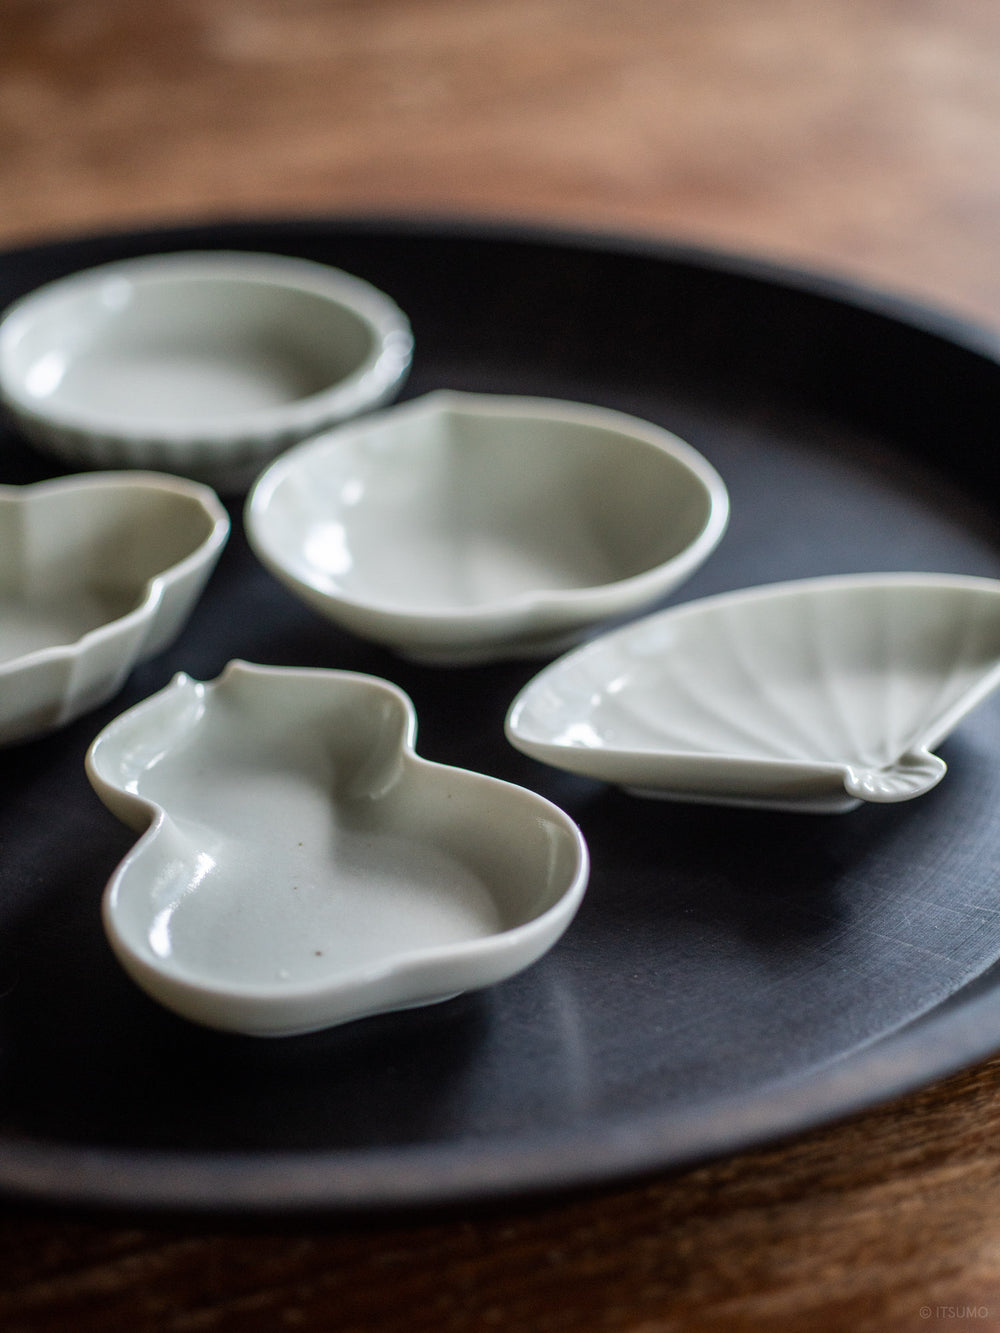 Small Azmaya serving dishes for soy sauce, salt or spices in Sekkai glaze